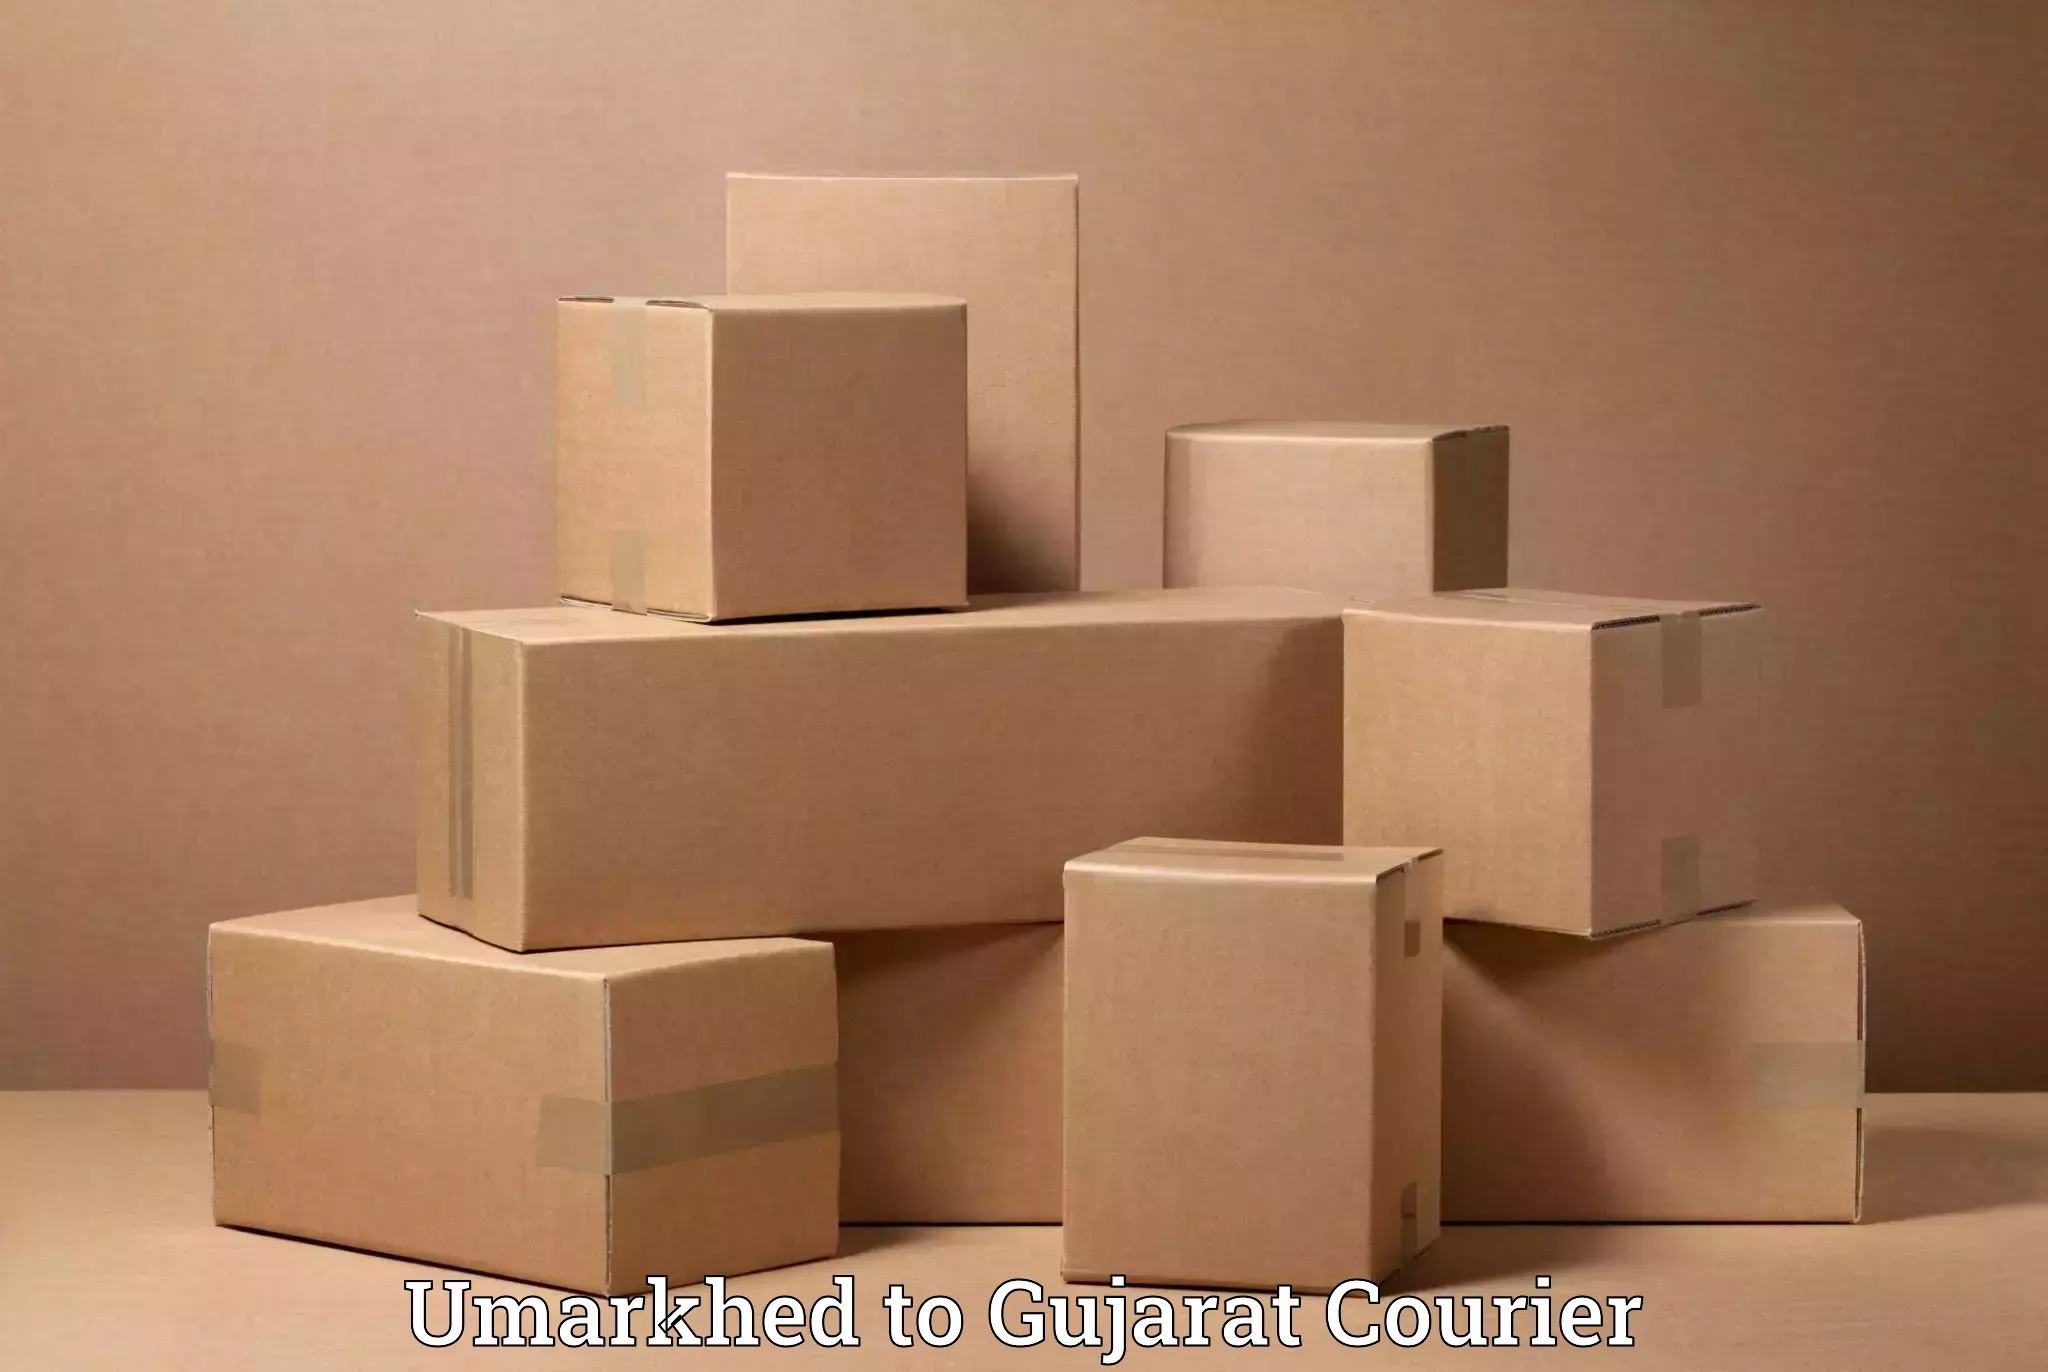 Trusted relocation experts Umarkhed to Gujarat